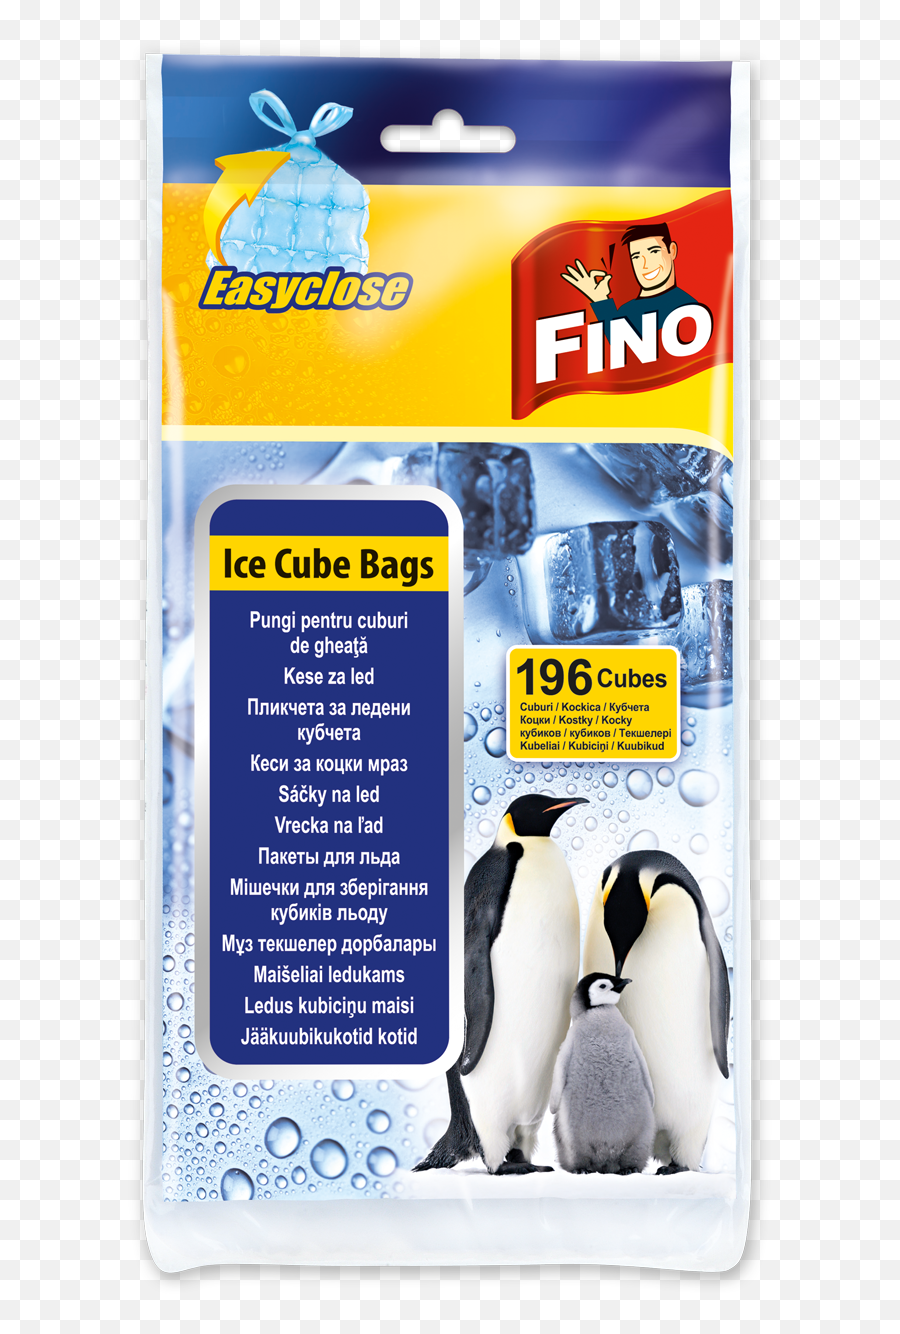 Ice Cube Bags - Fino Png,Ice Cubes Png